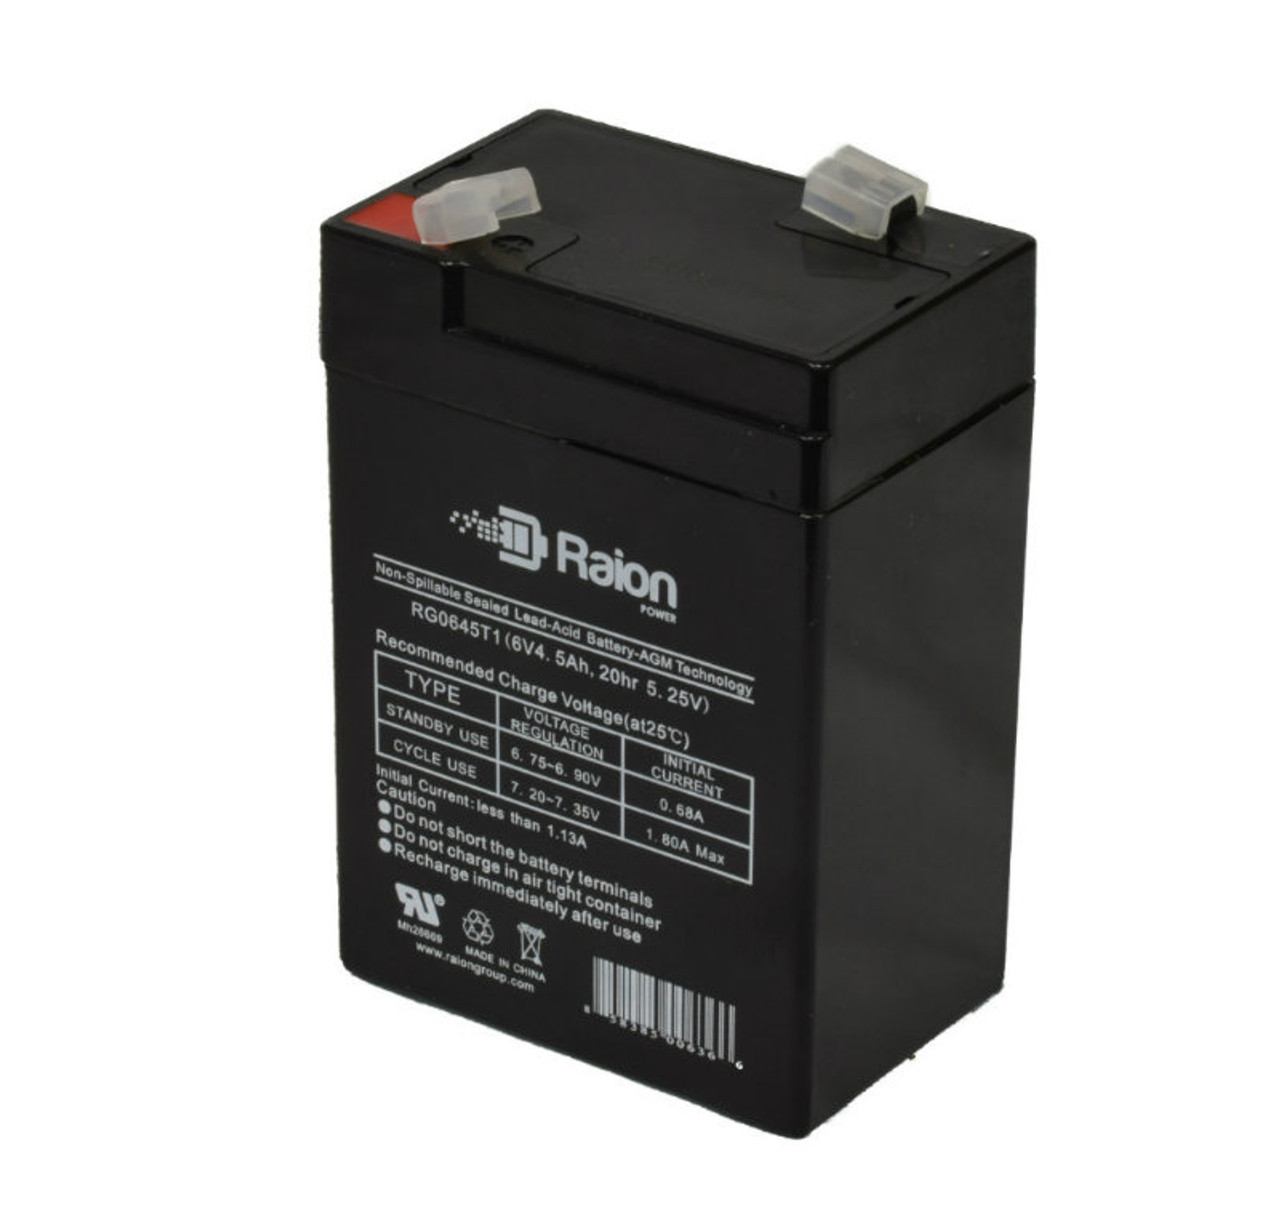 Raion Power RG0645T1 6V 4.5Ah Replacement Battery Cartridge for Criticare Systems 502Us Pulse Oximeters